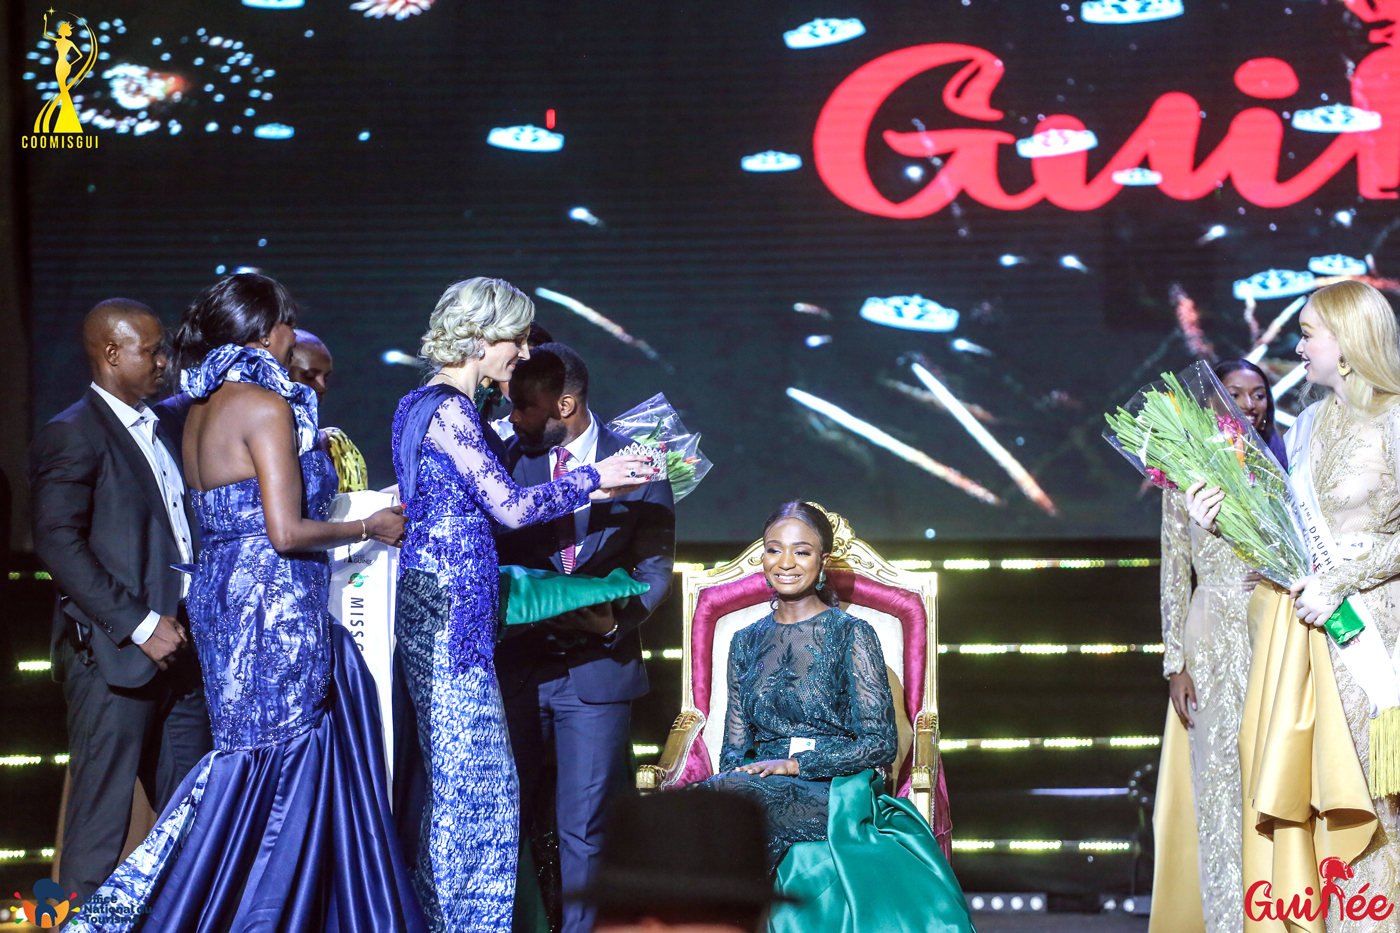 SARAN-KOUROUMA-MISS-GUINEE-2023-EDITION-12 - Saran Kourouma, 1st runner-up Conakry 2023 who becomes Miss Guinea 2023, succeeding Mariame Touré, Miss Guinea 2019 - 1st Runner-up Hadja Kadiatou Condé Miss Conakry 2023 - 2nd Runner-up Aïssatou Dioumo Diallo Miss Alby Beauty 2023 - Under the patronage of the First Lady of Guinee Republic, her excellency Mrs LAURIANE DOUMBOUYA